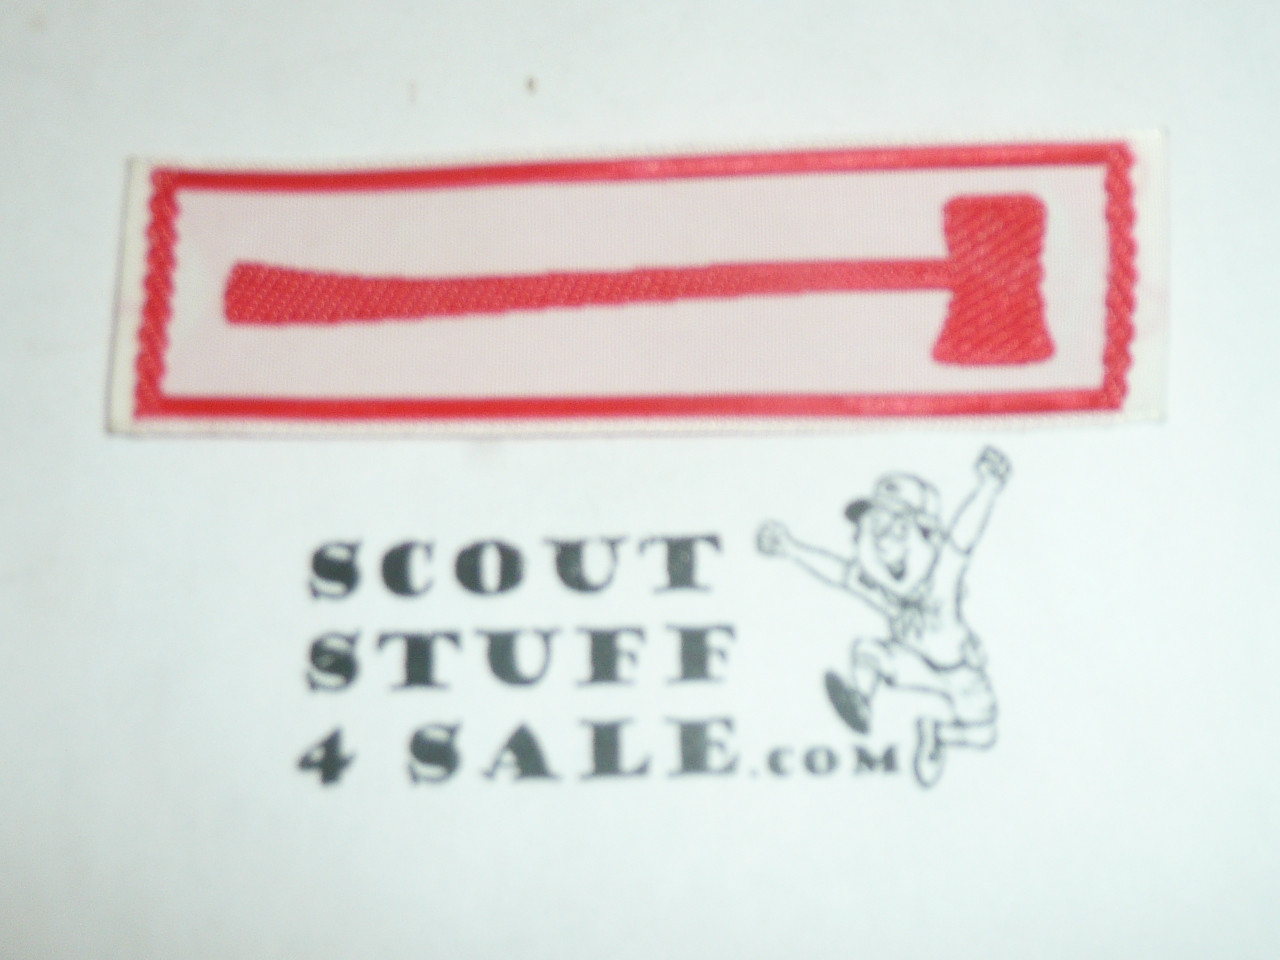 Paul Bunyan Woven Patch, Generic Boy Scout Issue